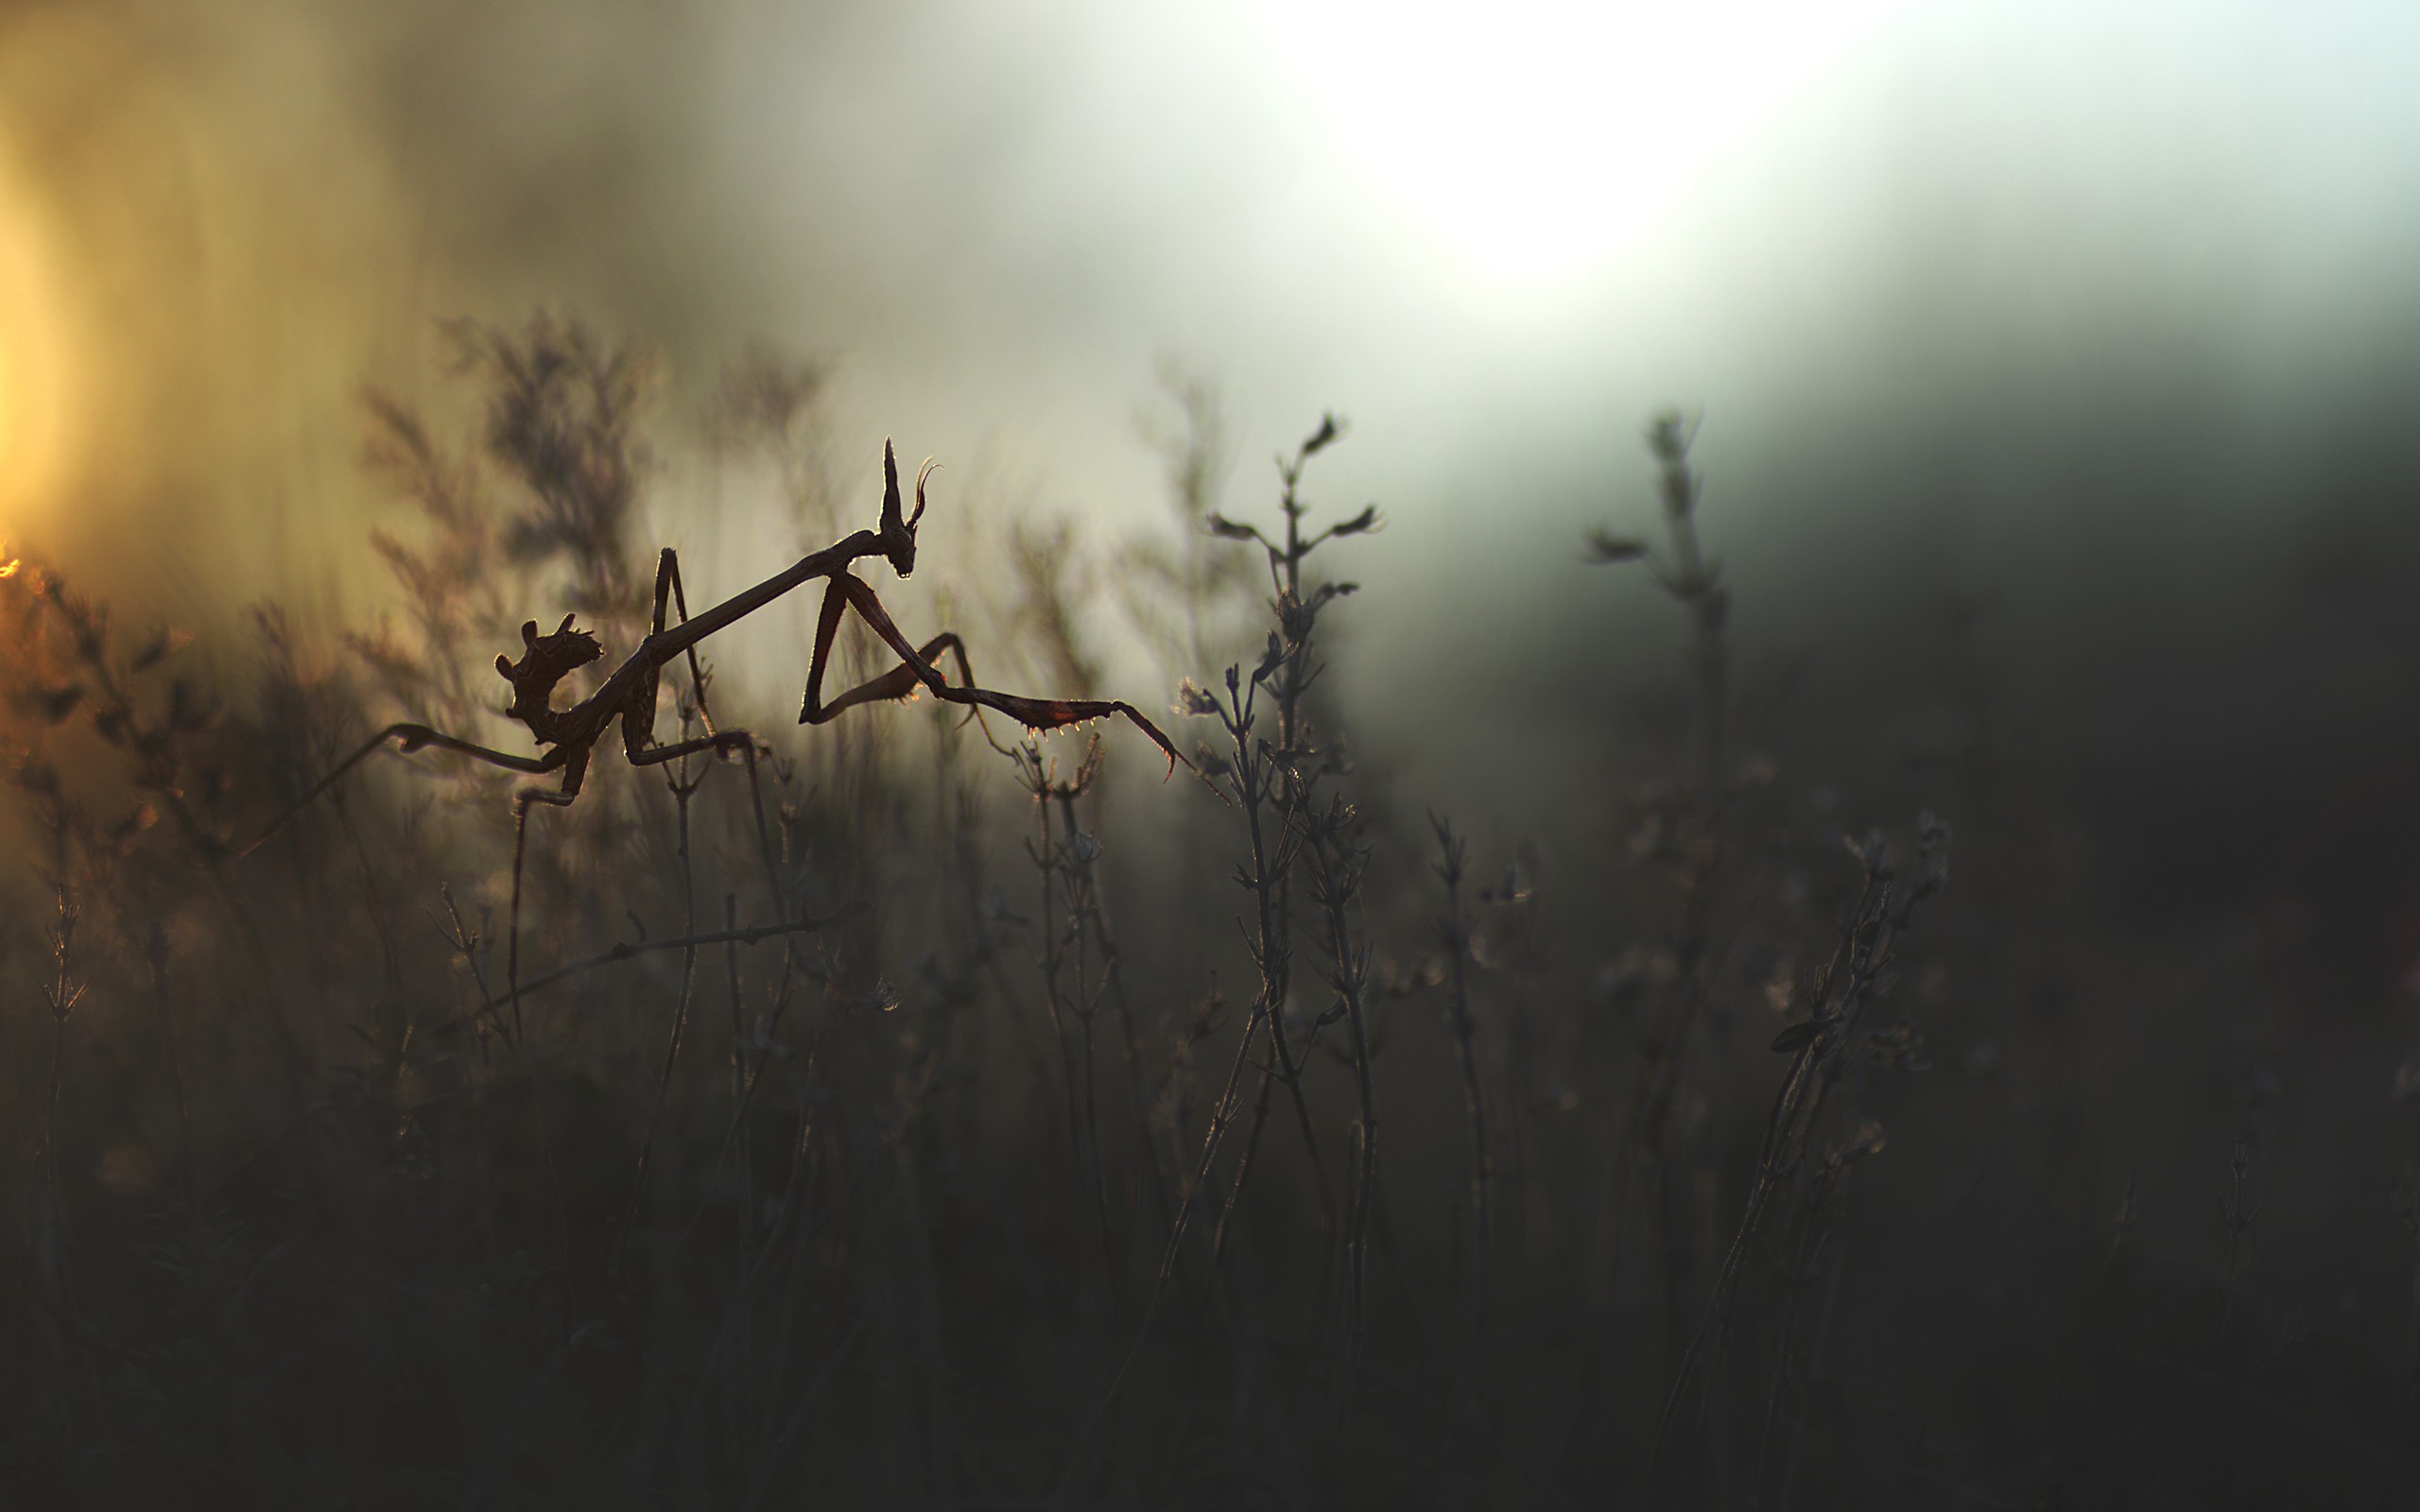 General 2560x1600 insect nature mantis silhouette